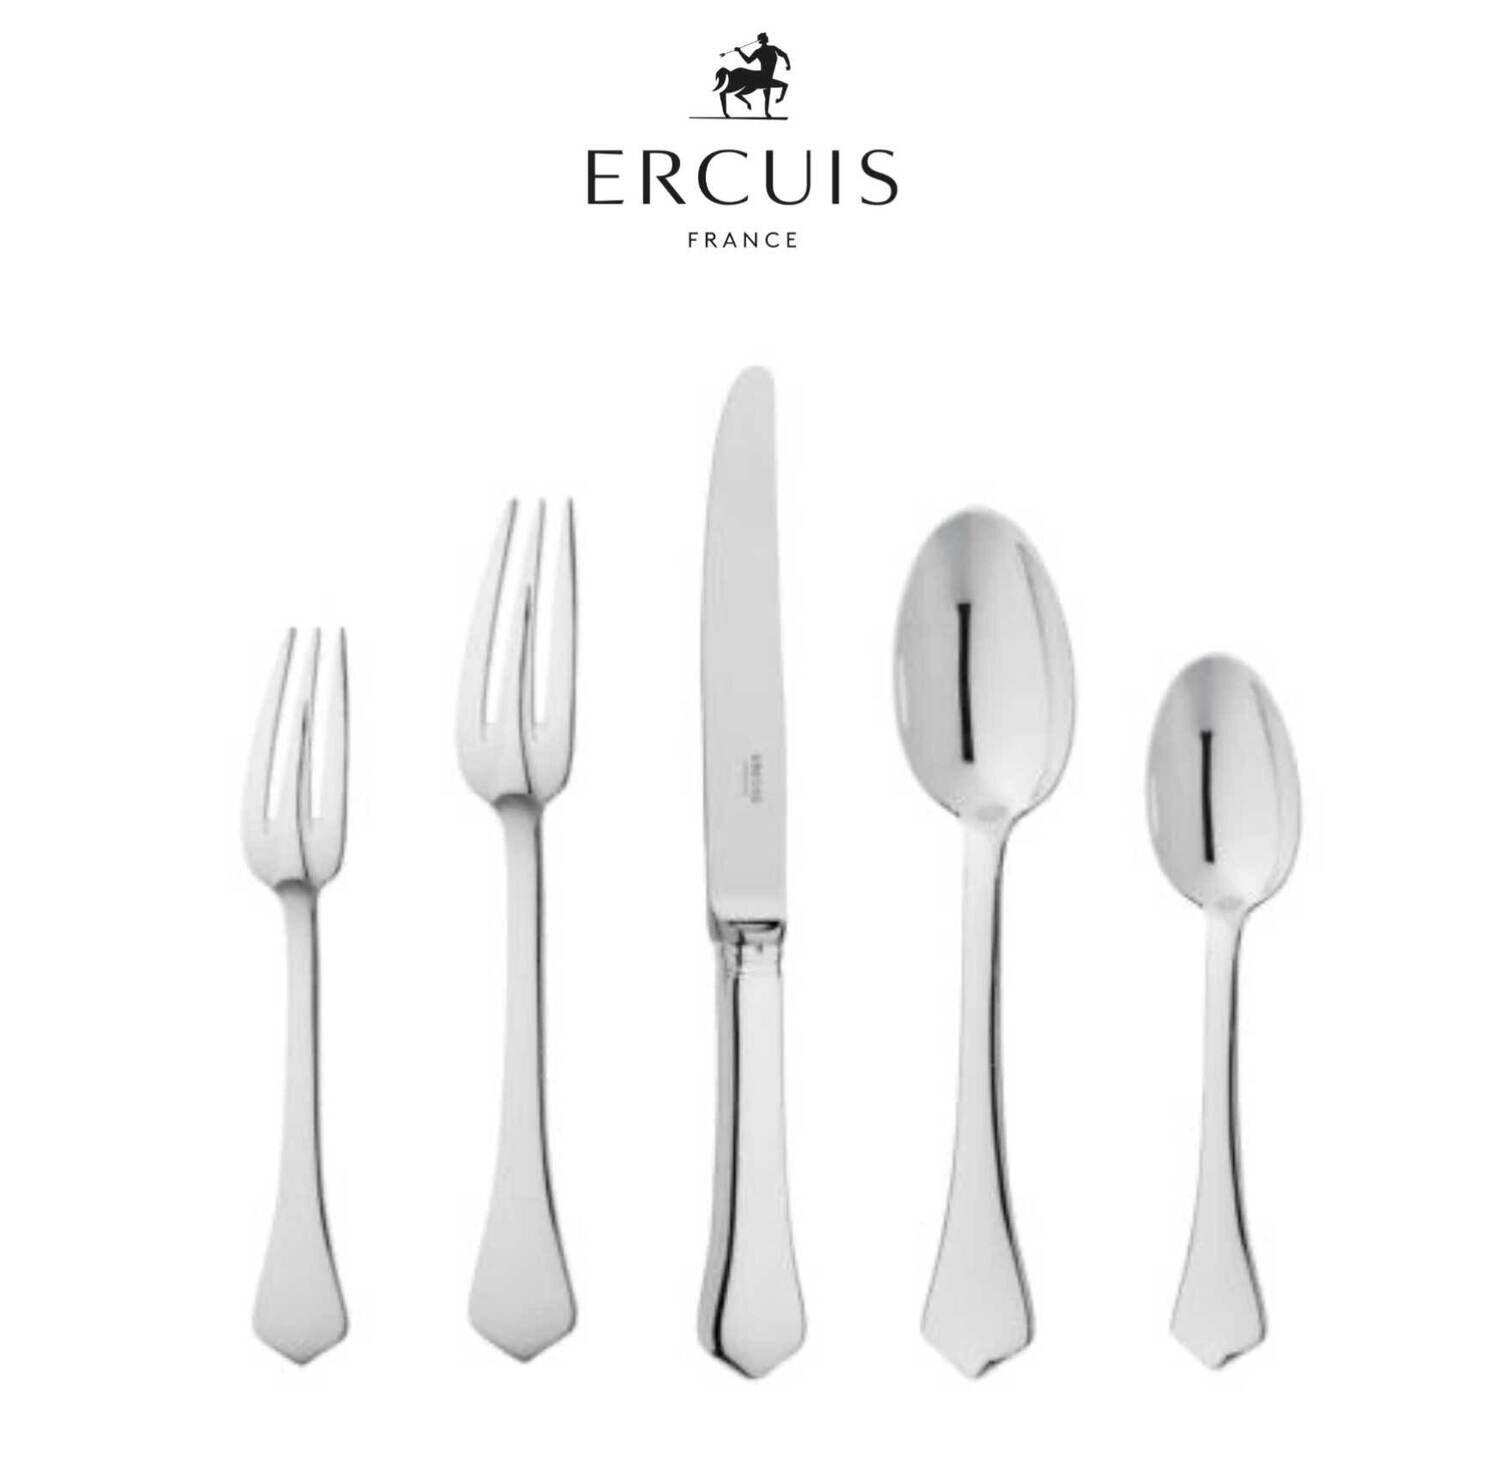 Ercuis Brantome Table Knife S.H. 9.75 Inch Stainless Steel F660150-11